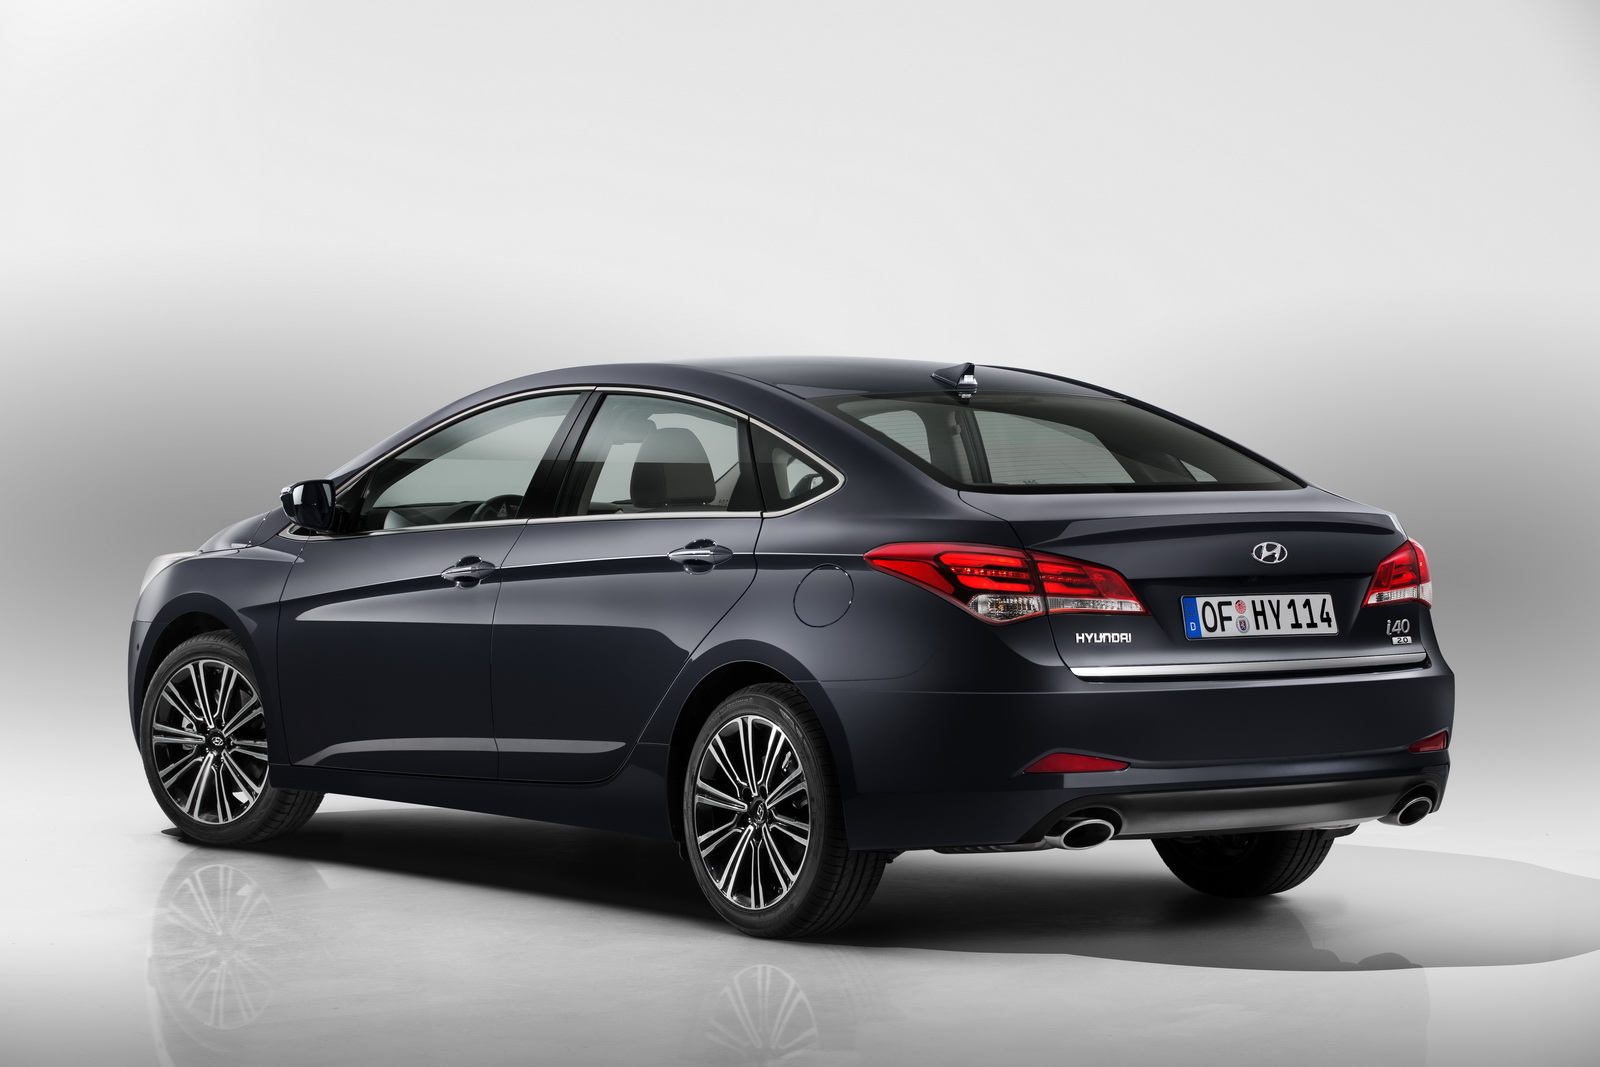 This is the Refreshed Hyundai i40 – Gains Dual-Clutch Transmission